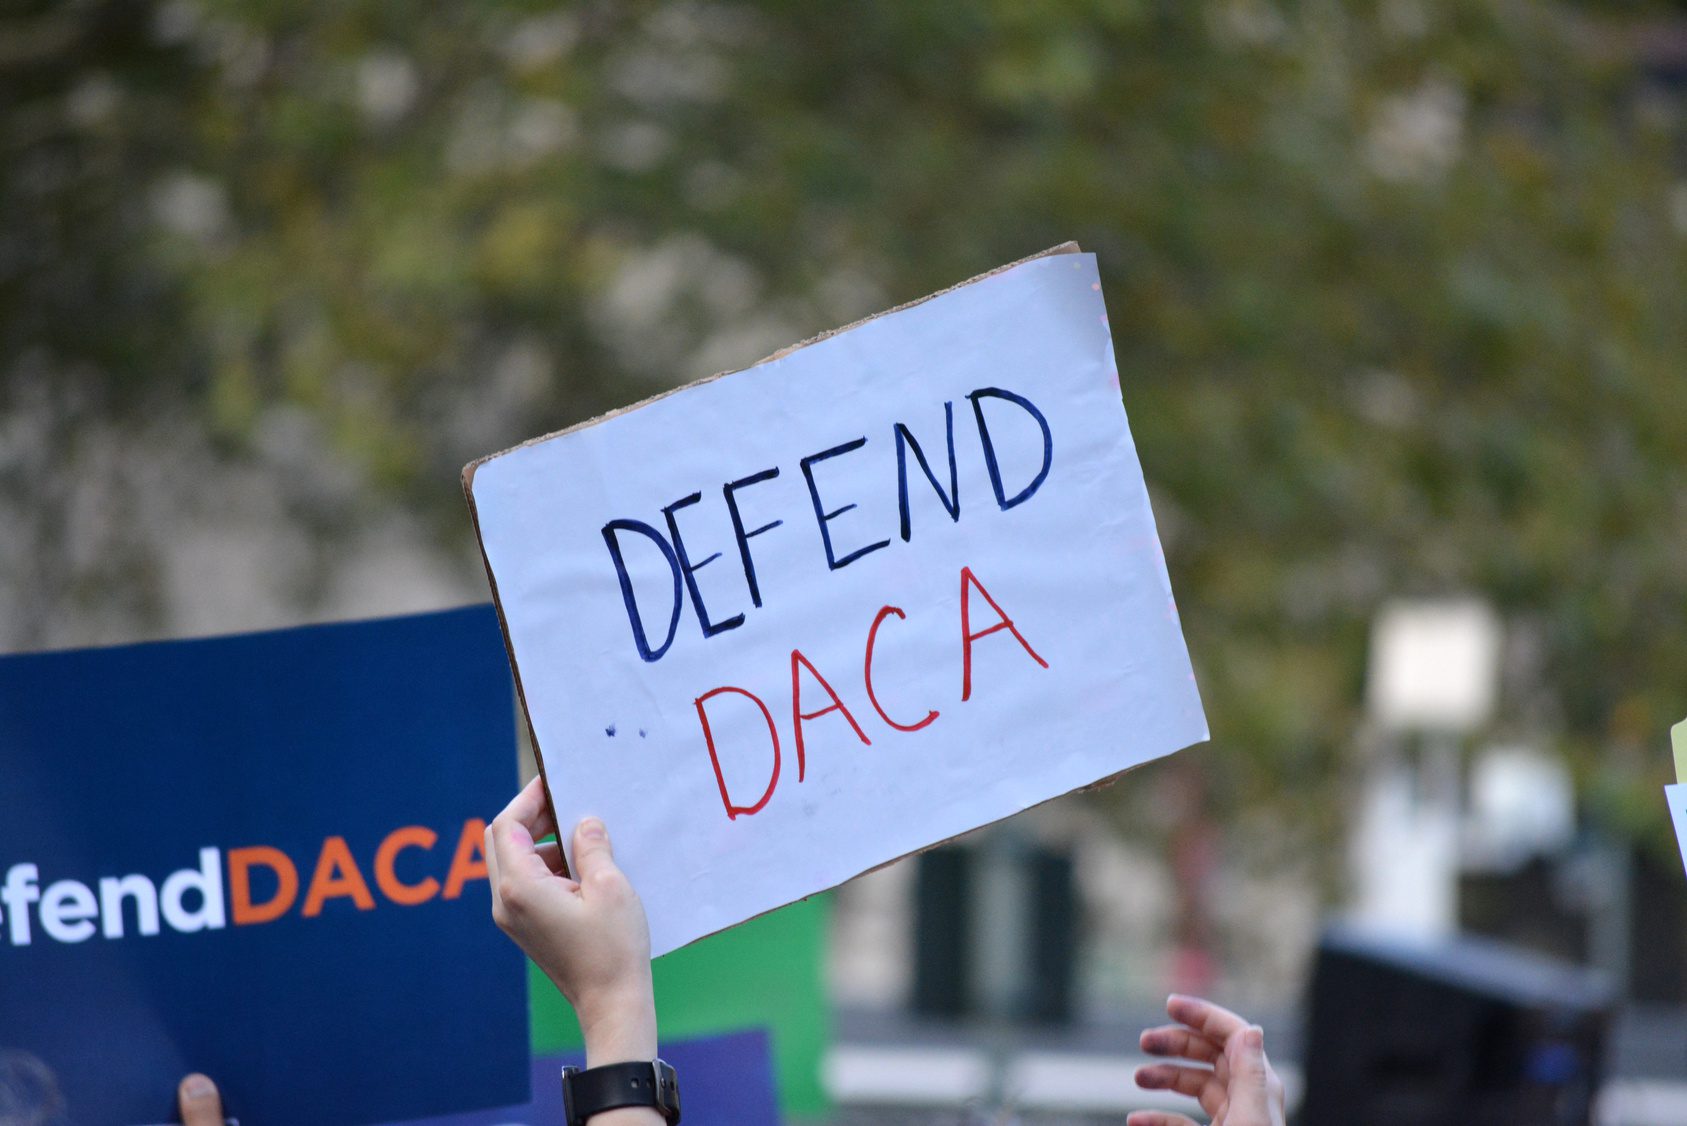 The End of DACA, At Least For Now